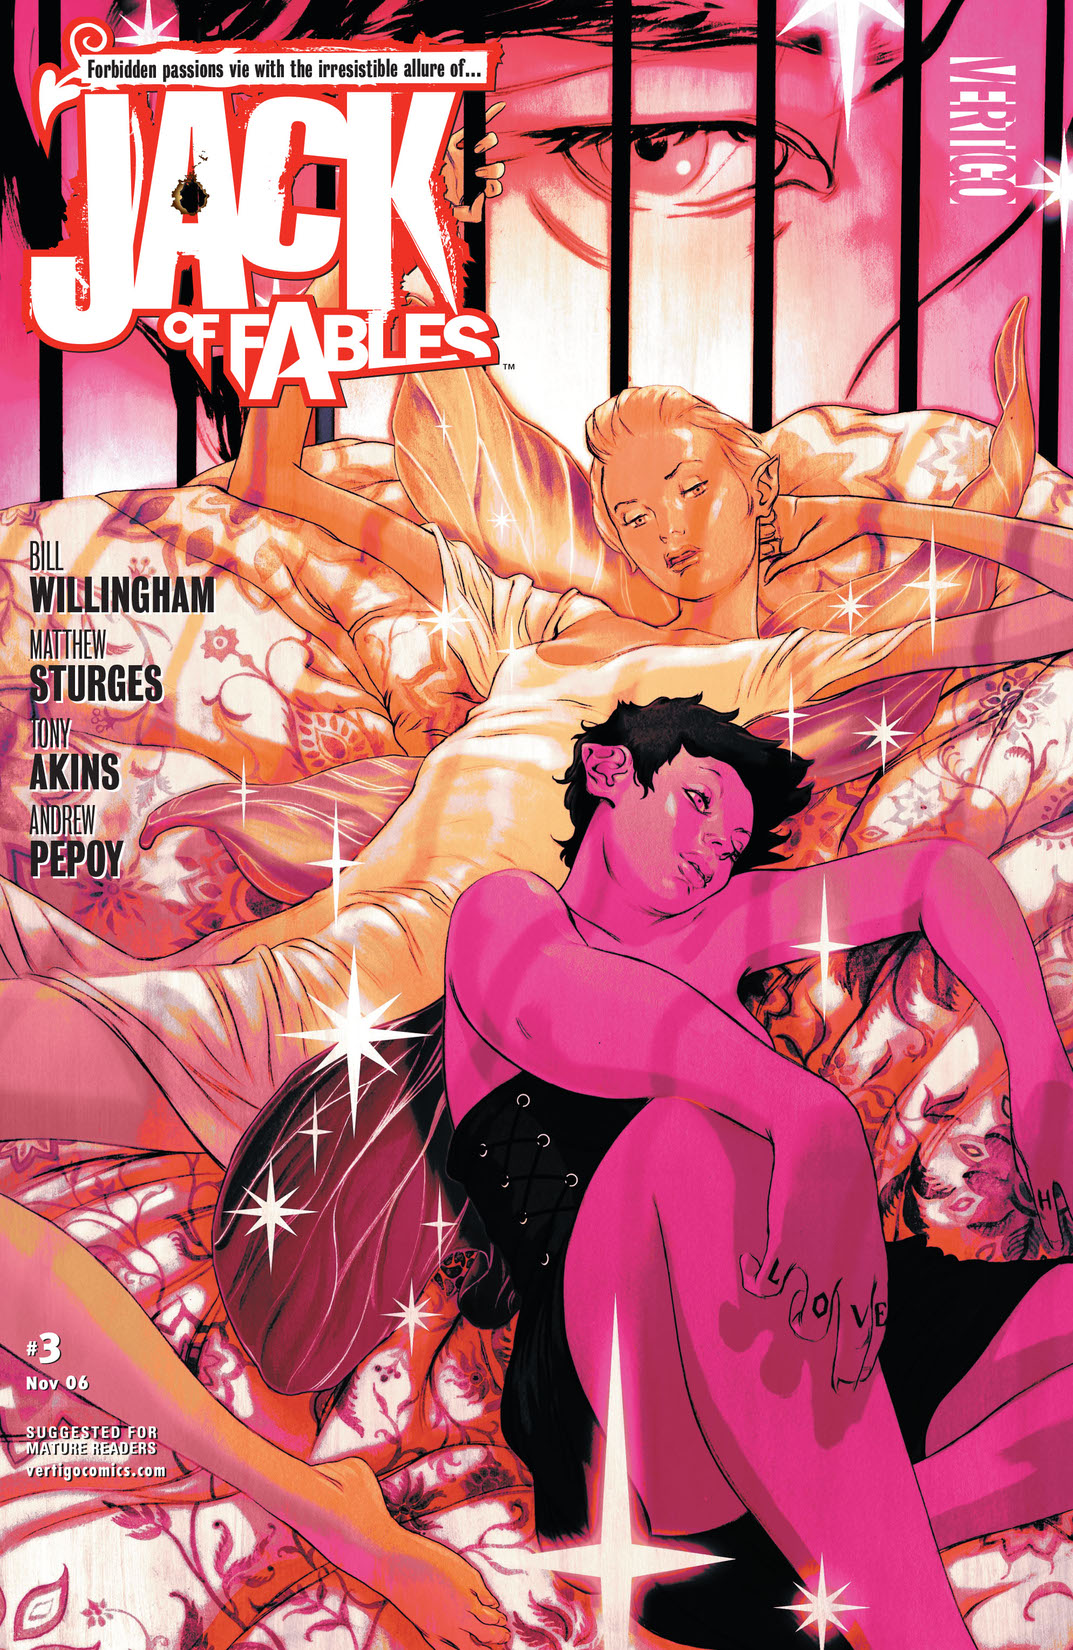 Jack of Fables #3 preview images